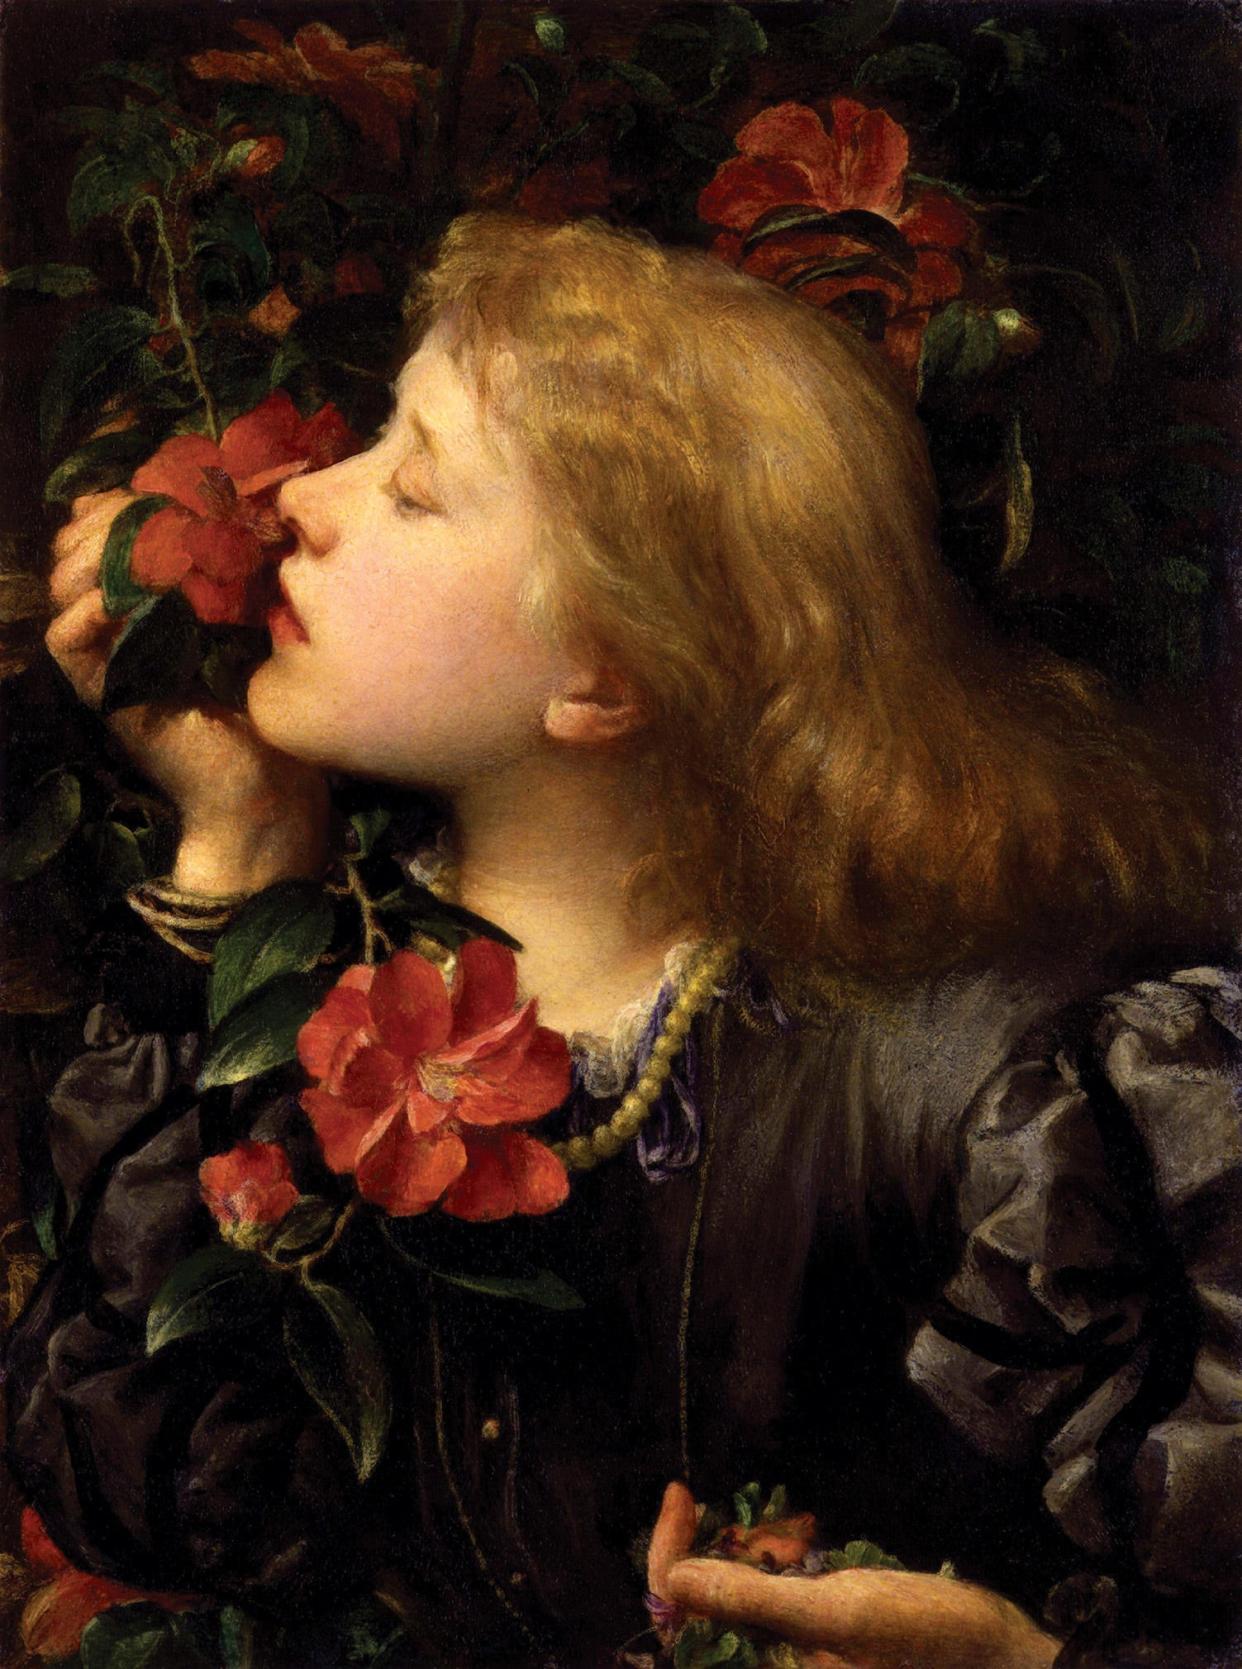 George Frederic Watts, Ellen Terry ('Choosing'), 1864, oil on strawboard mounted on Gatorfoam, 472 x 352 mm. National Portrait Gallery, London. Accepted in lieu of tax by H.M. Government and allocated to the Gallery, 1975. © National Portrait Gallery, London